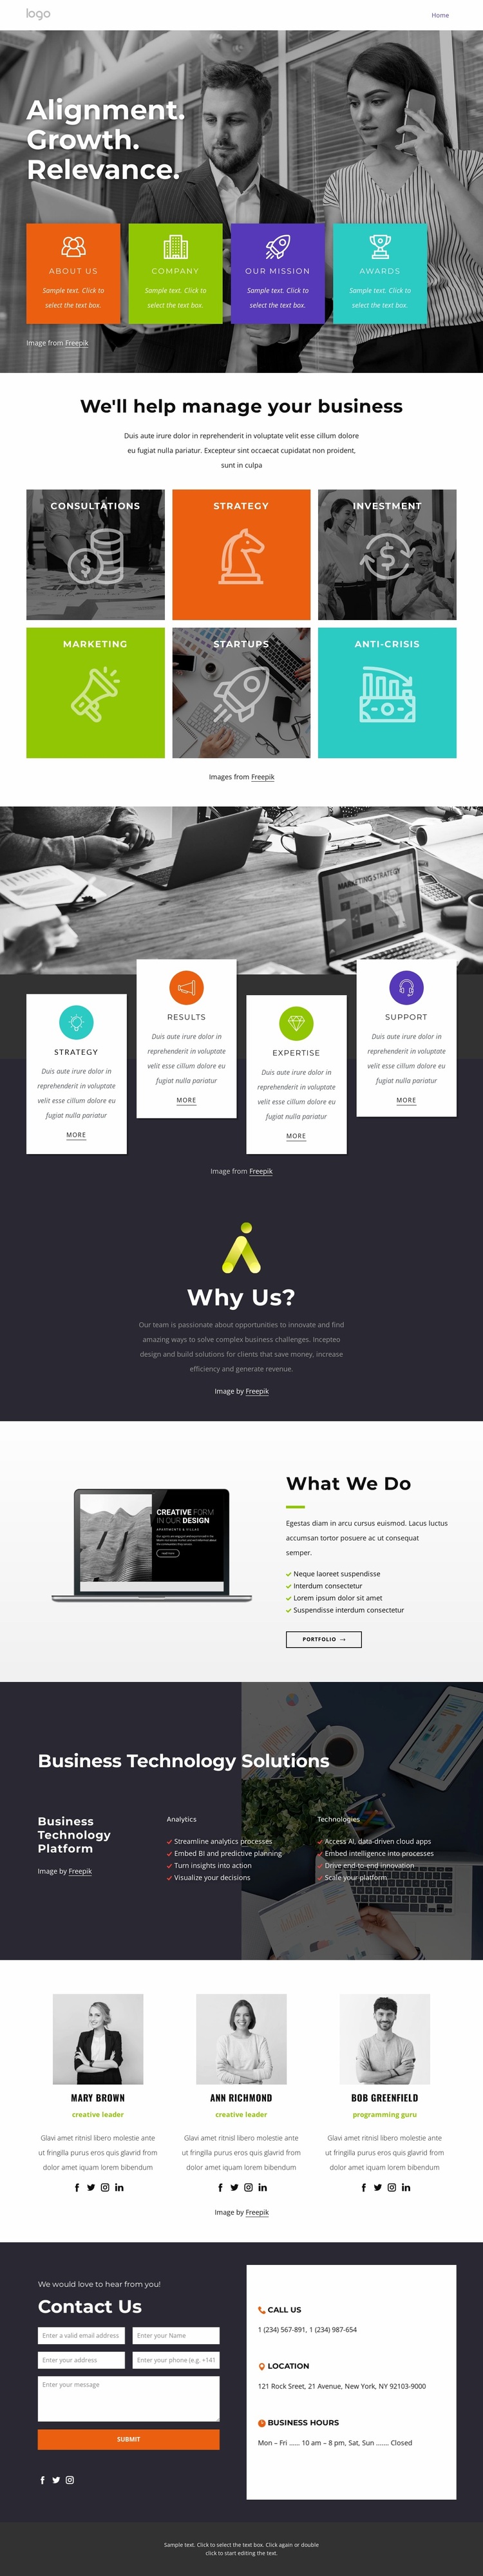 Business growth and transformation Website Design